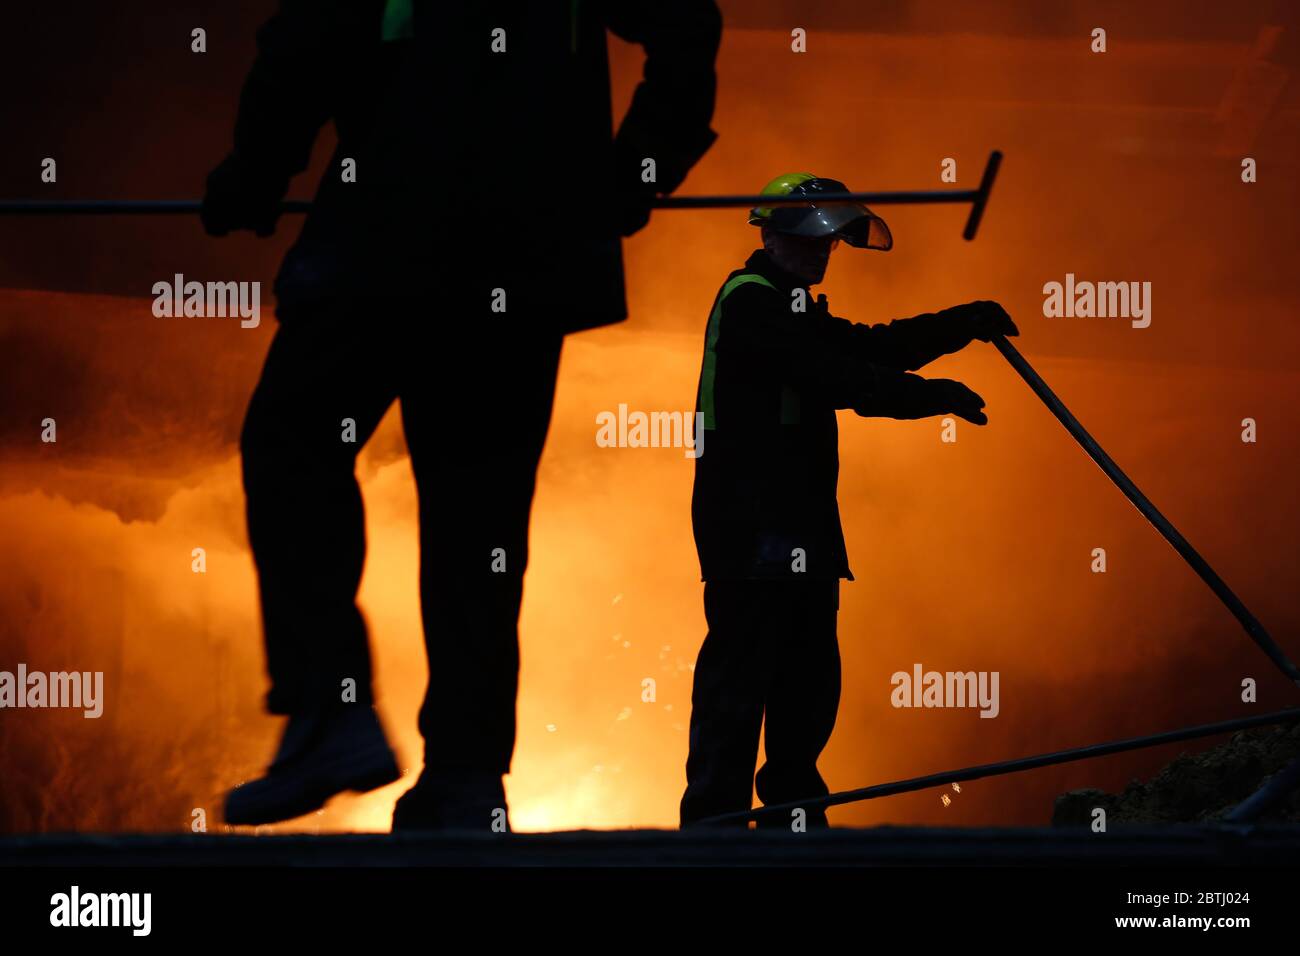 Blast furnace workers duing iron production Stock Photo